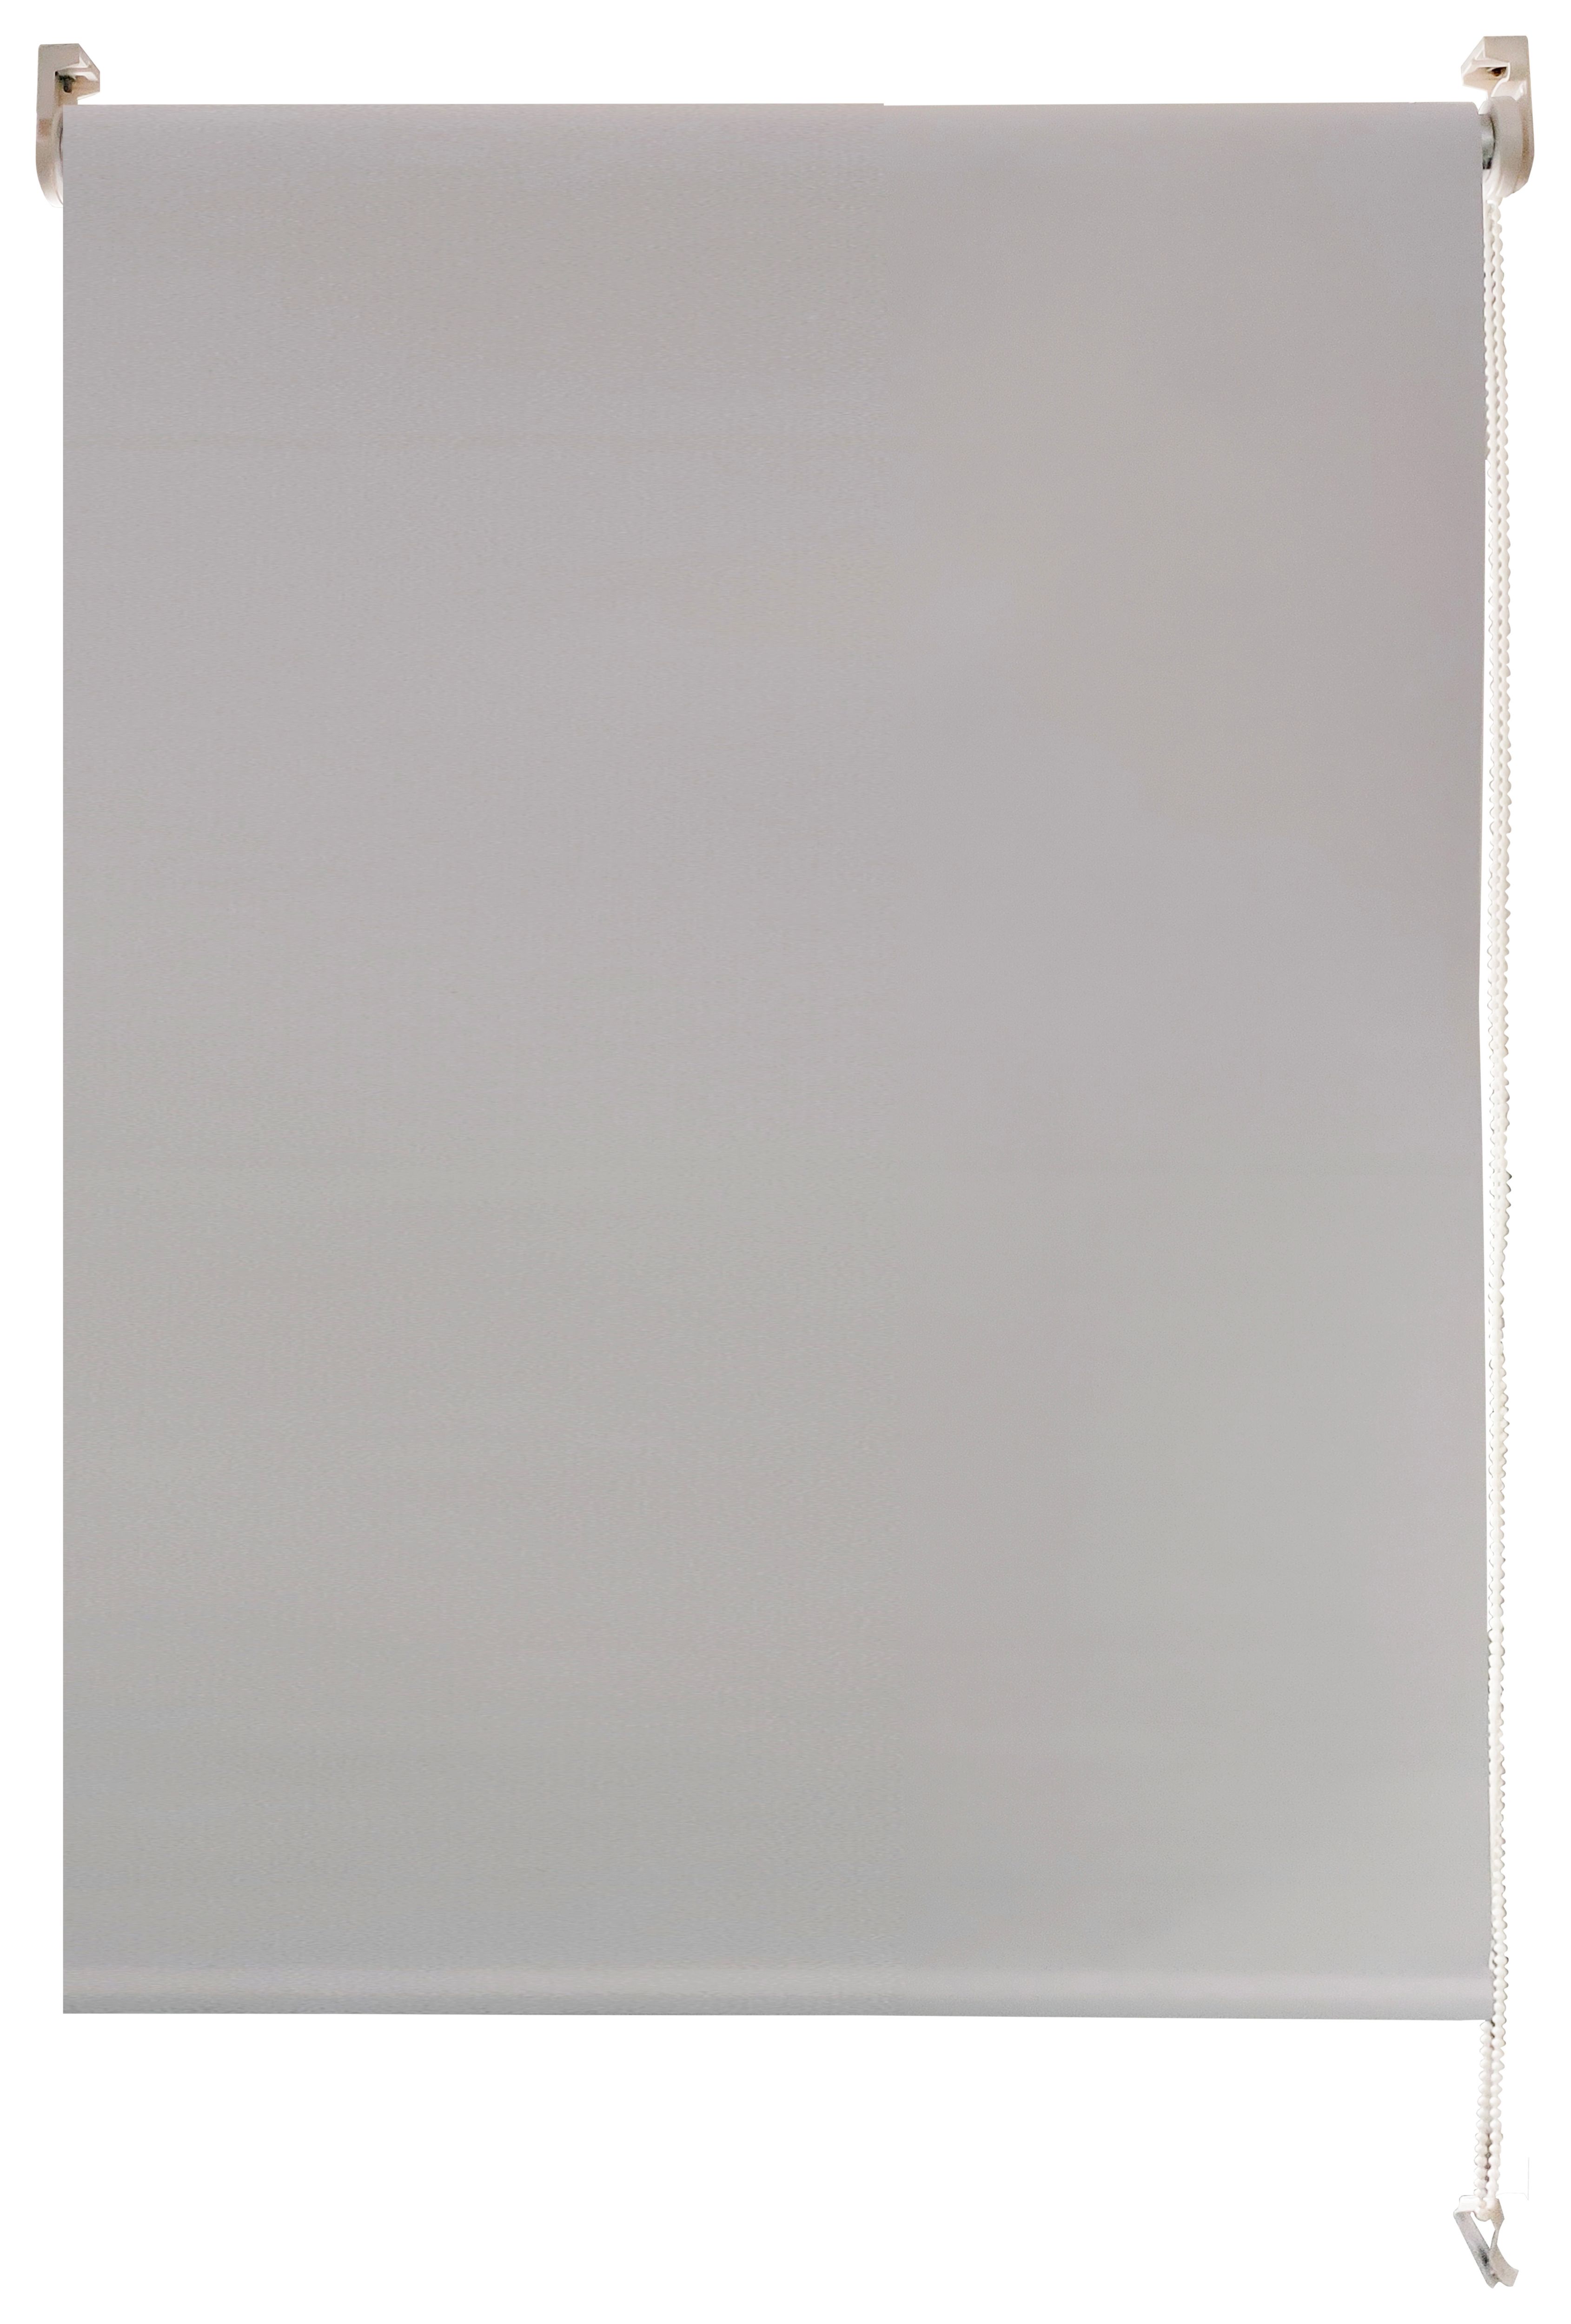 Image of Wickes Blackout Roller Blind Grey 150x170cm